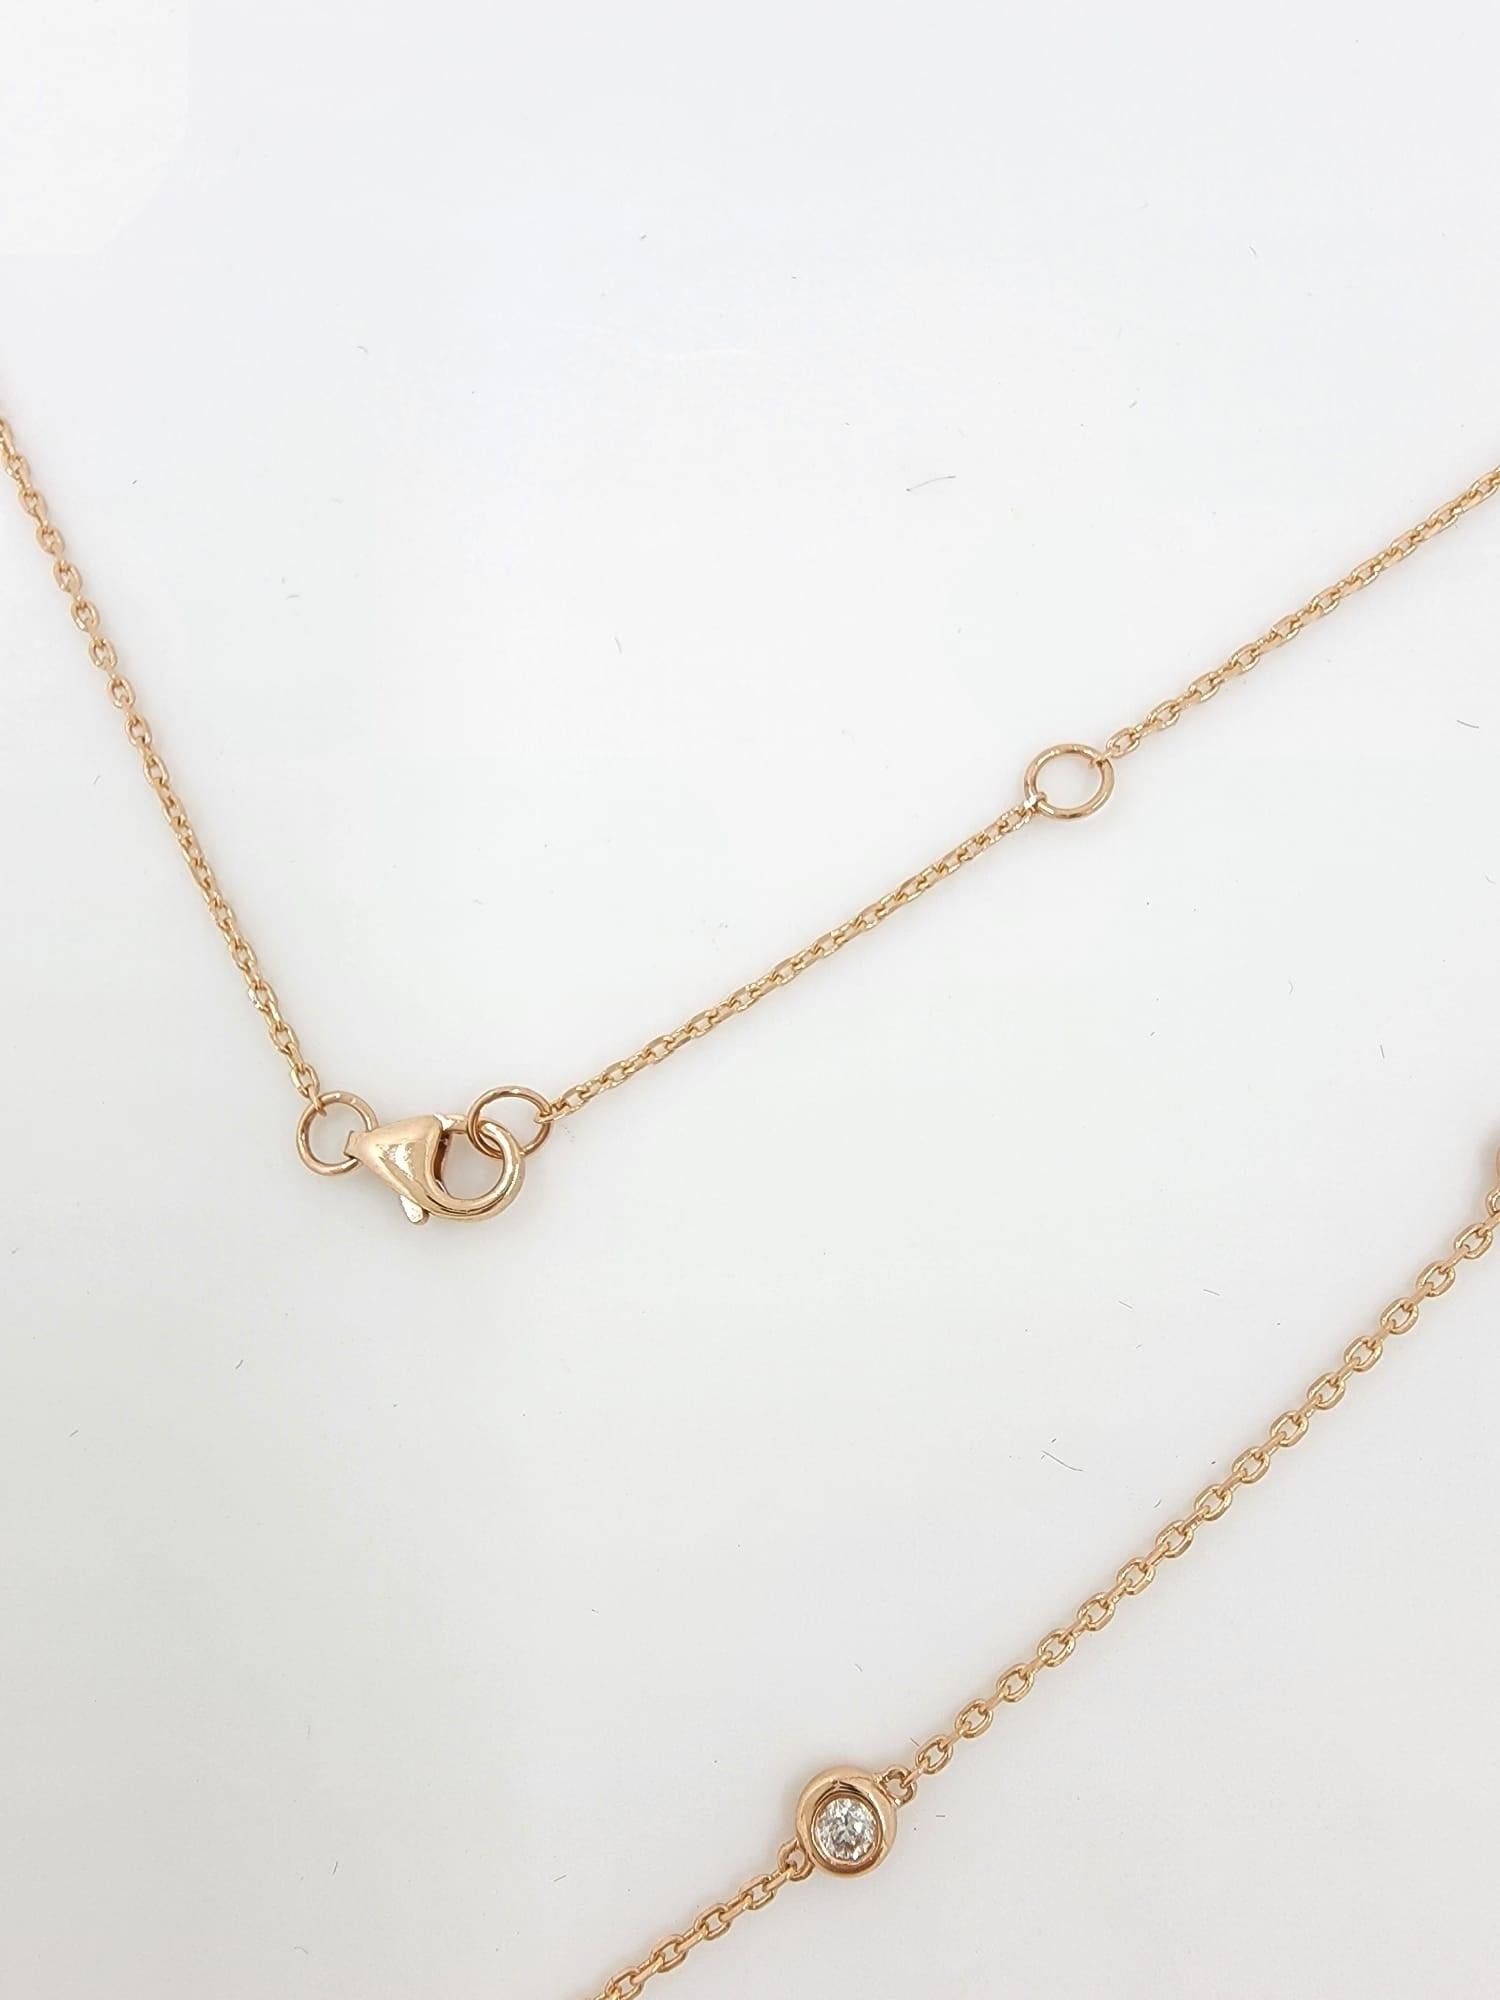 Brilliant Cut 10-Station Diamond by the Yard Necklace in 14 Karat Rose Gold For Sale